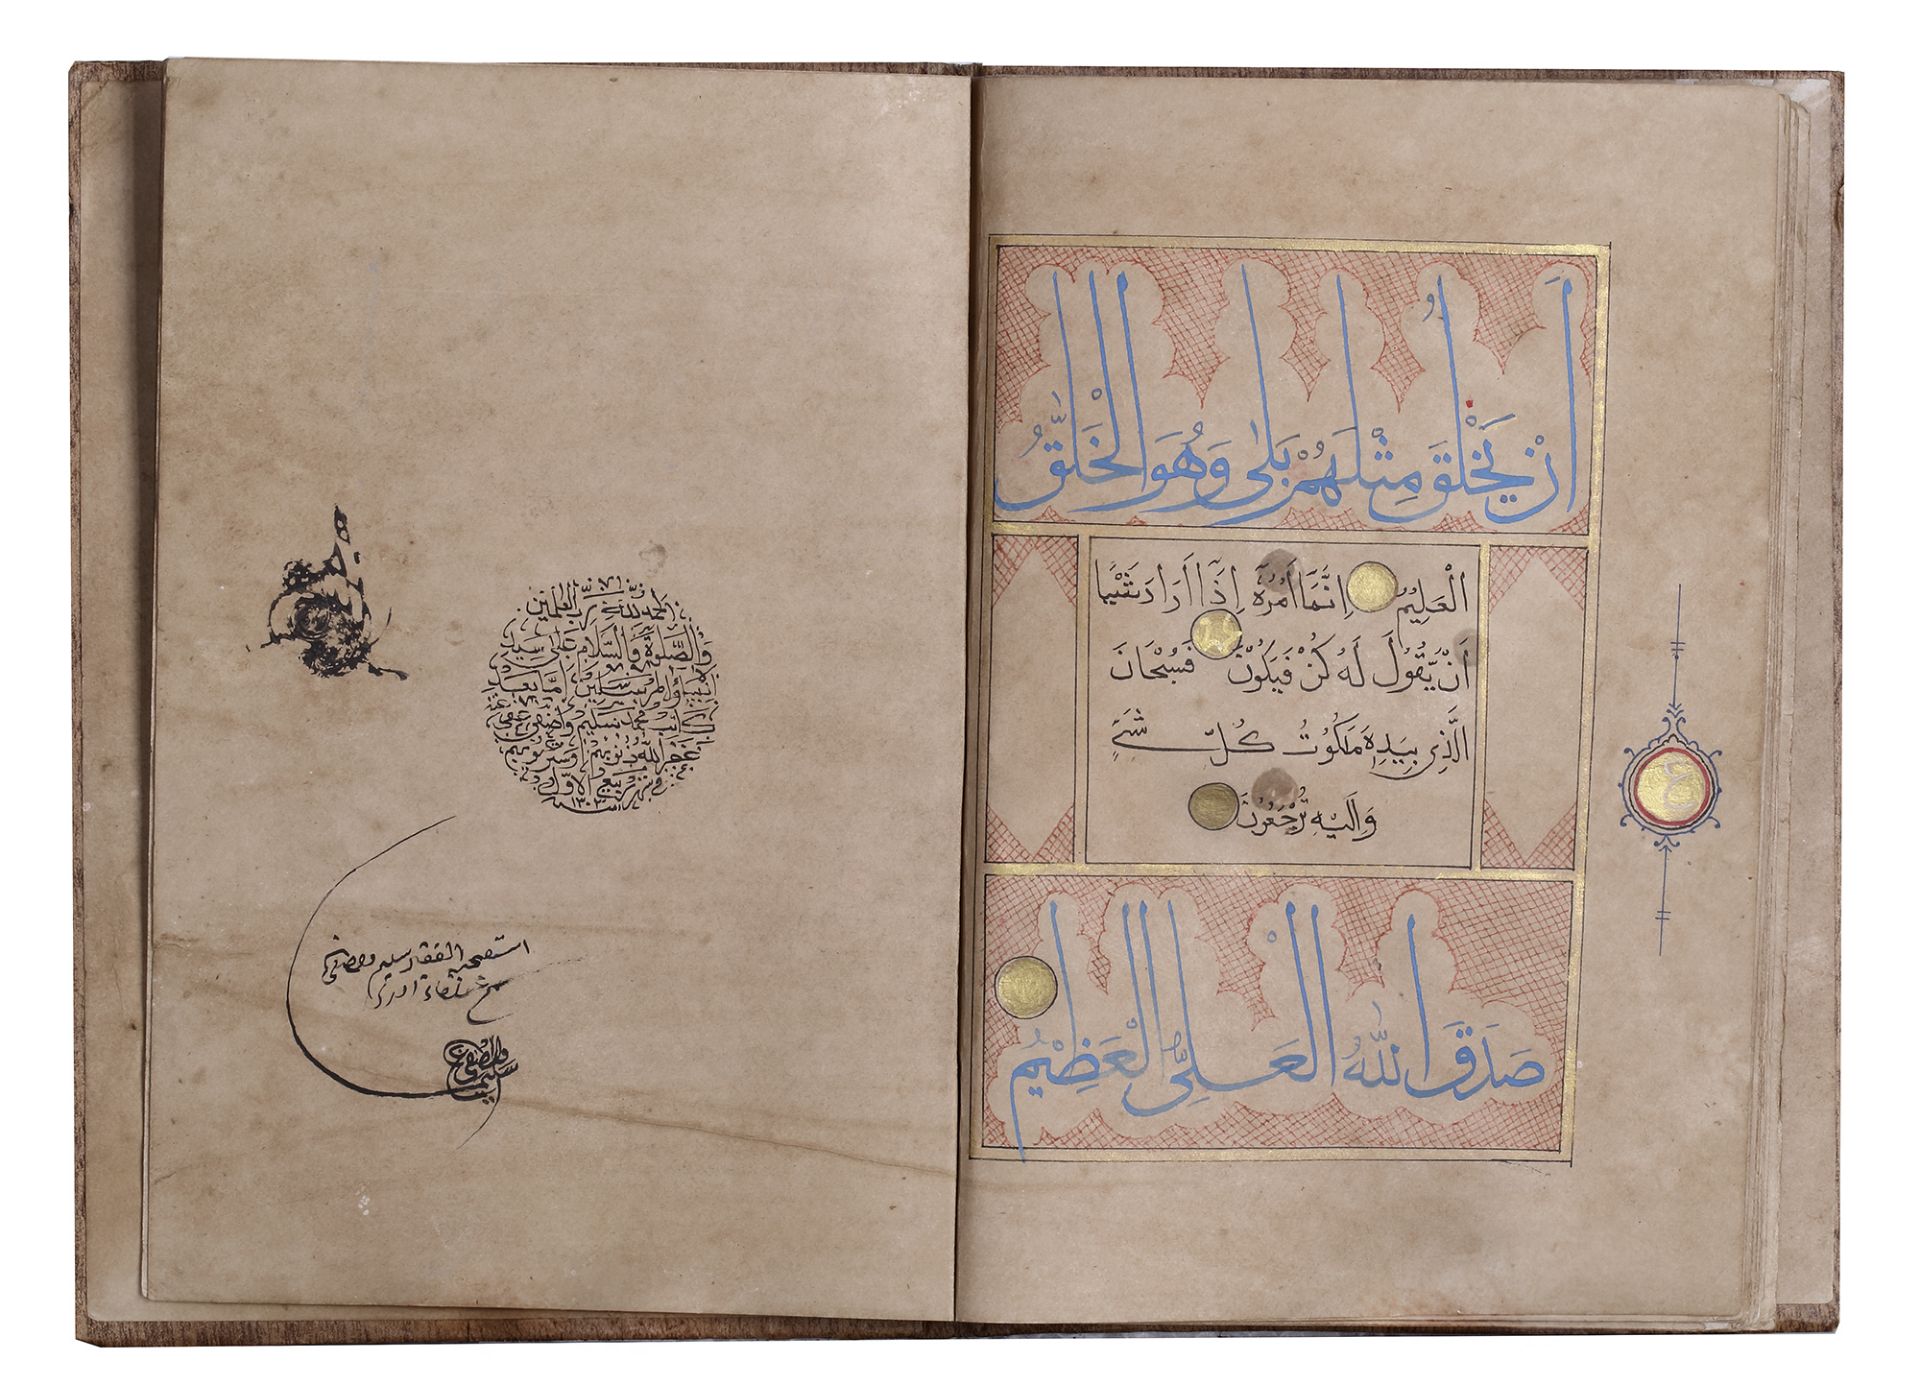 A QURAN SECTION WRITTEN BY MEHMET SELIM VASFI, OTTOMAN TURKEY, DATED 1303 AH/1885 AD - Image 2 of 4